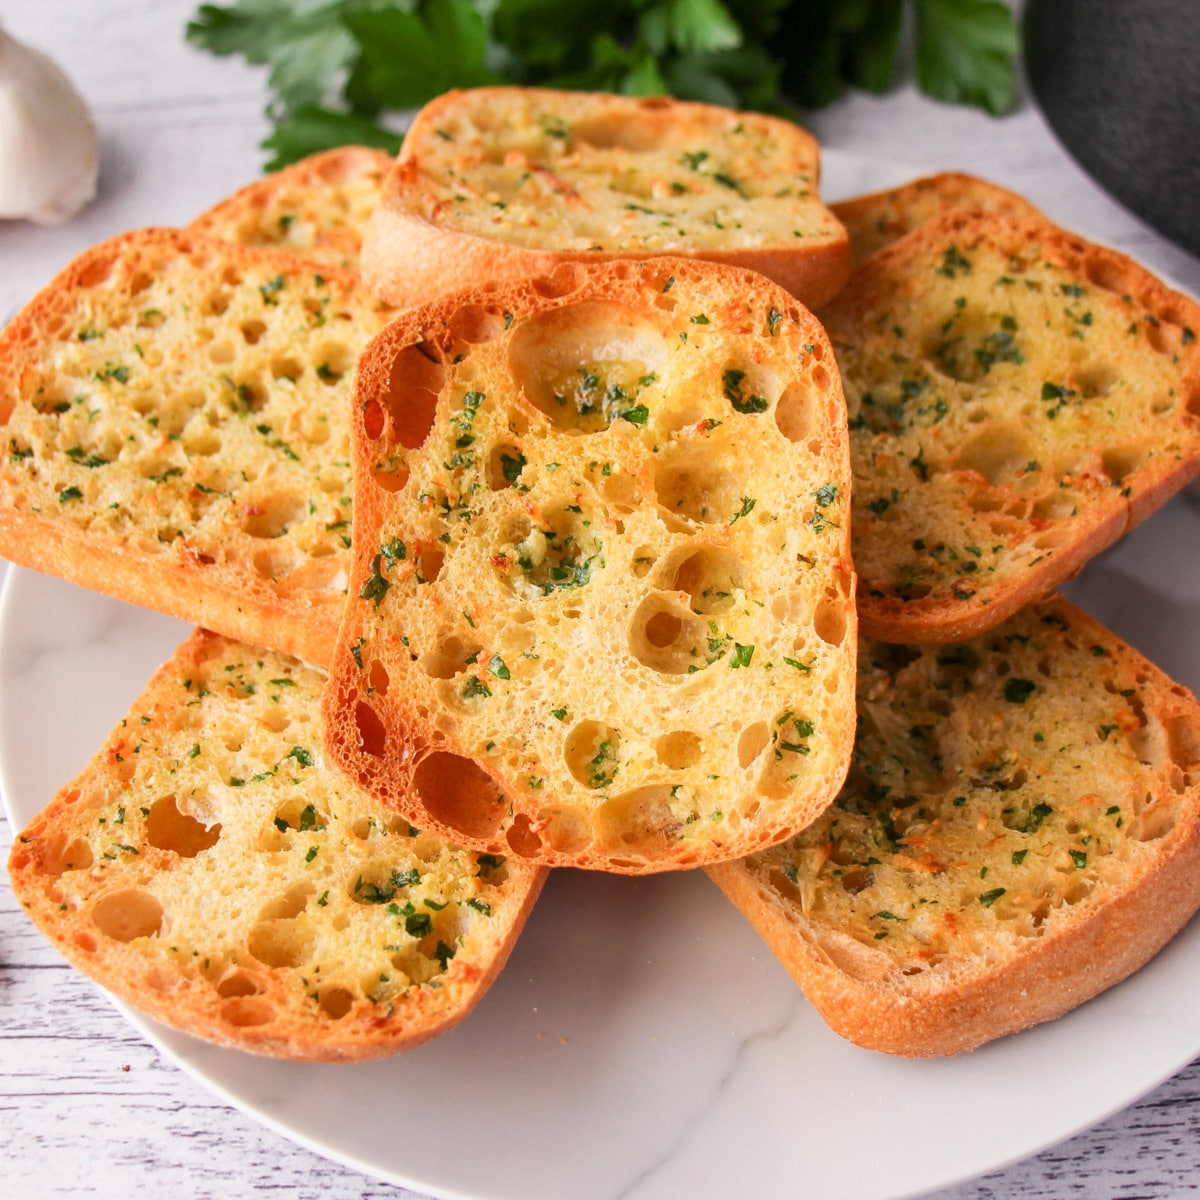 Garlic bread on a white plate with parsley.